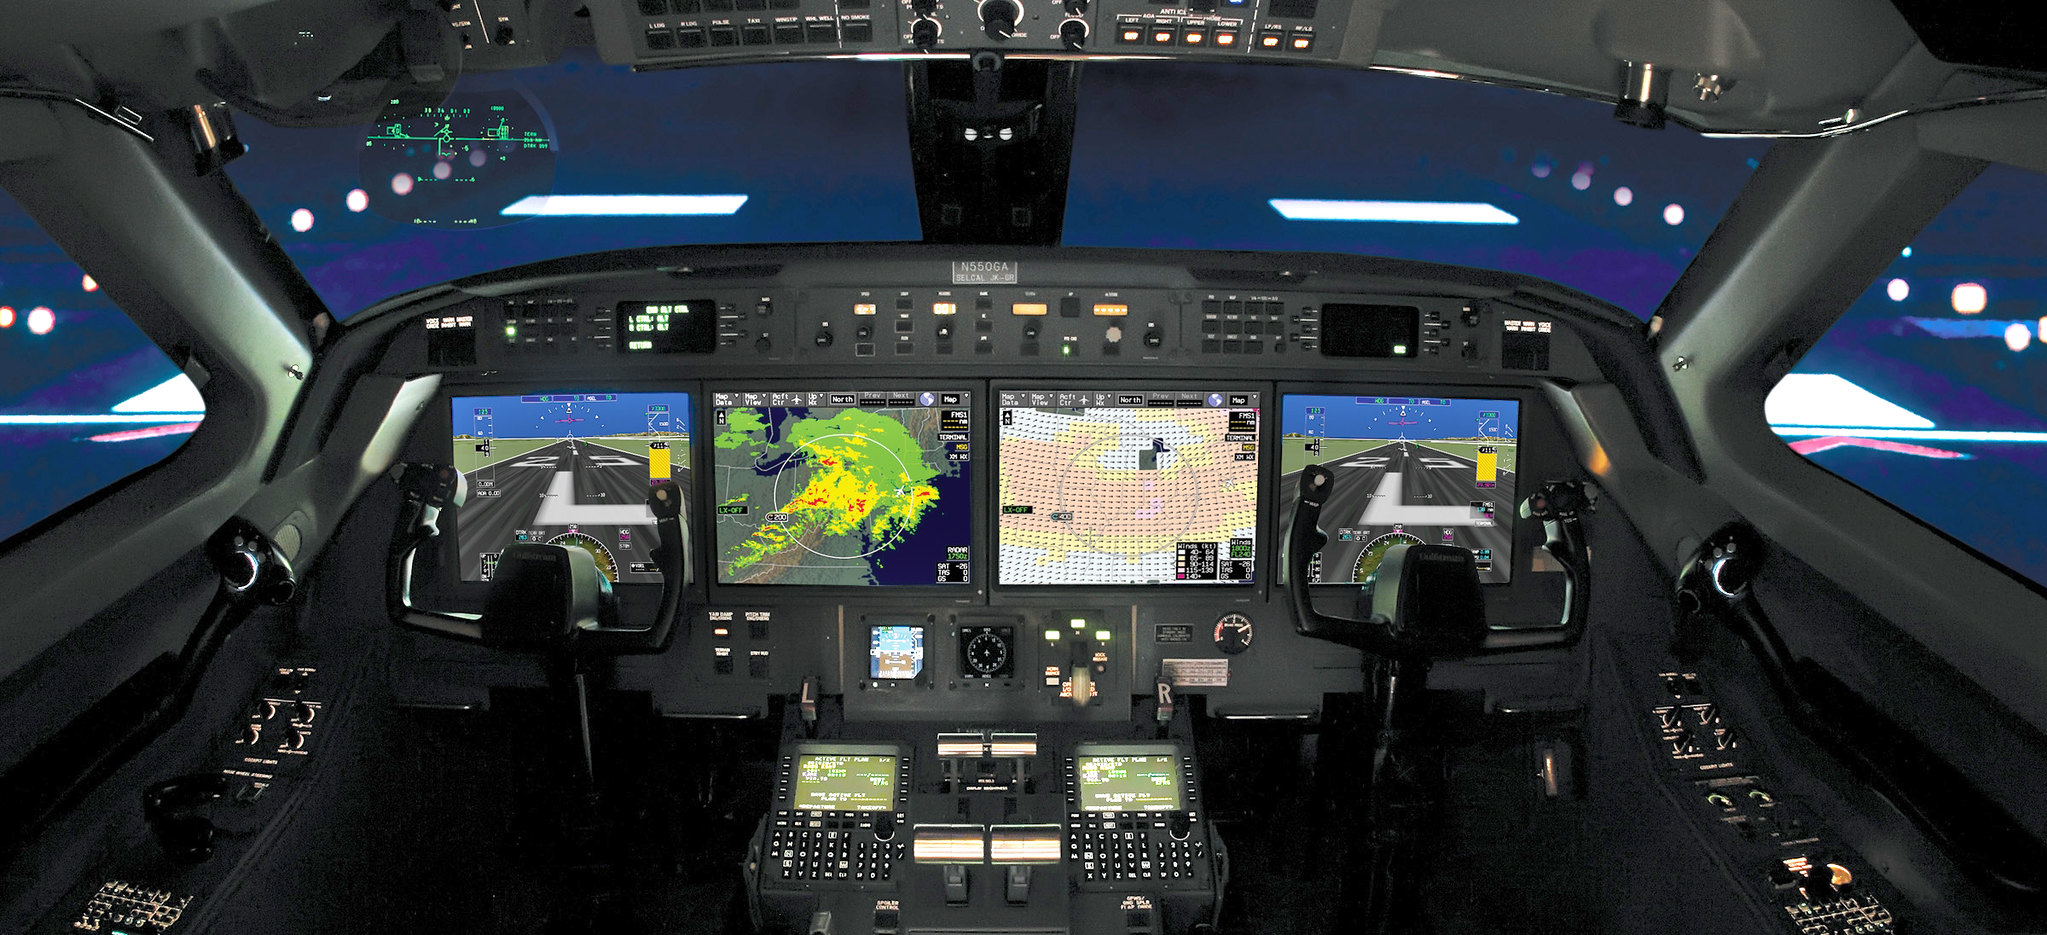 Digital composition of Gulfstream cockpit with screens showing svd-pfd2 / weather / etc. foxtrot enhancements (by Charly W. Karl CC BY-ND 2.0 via Flickr).